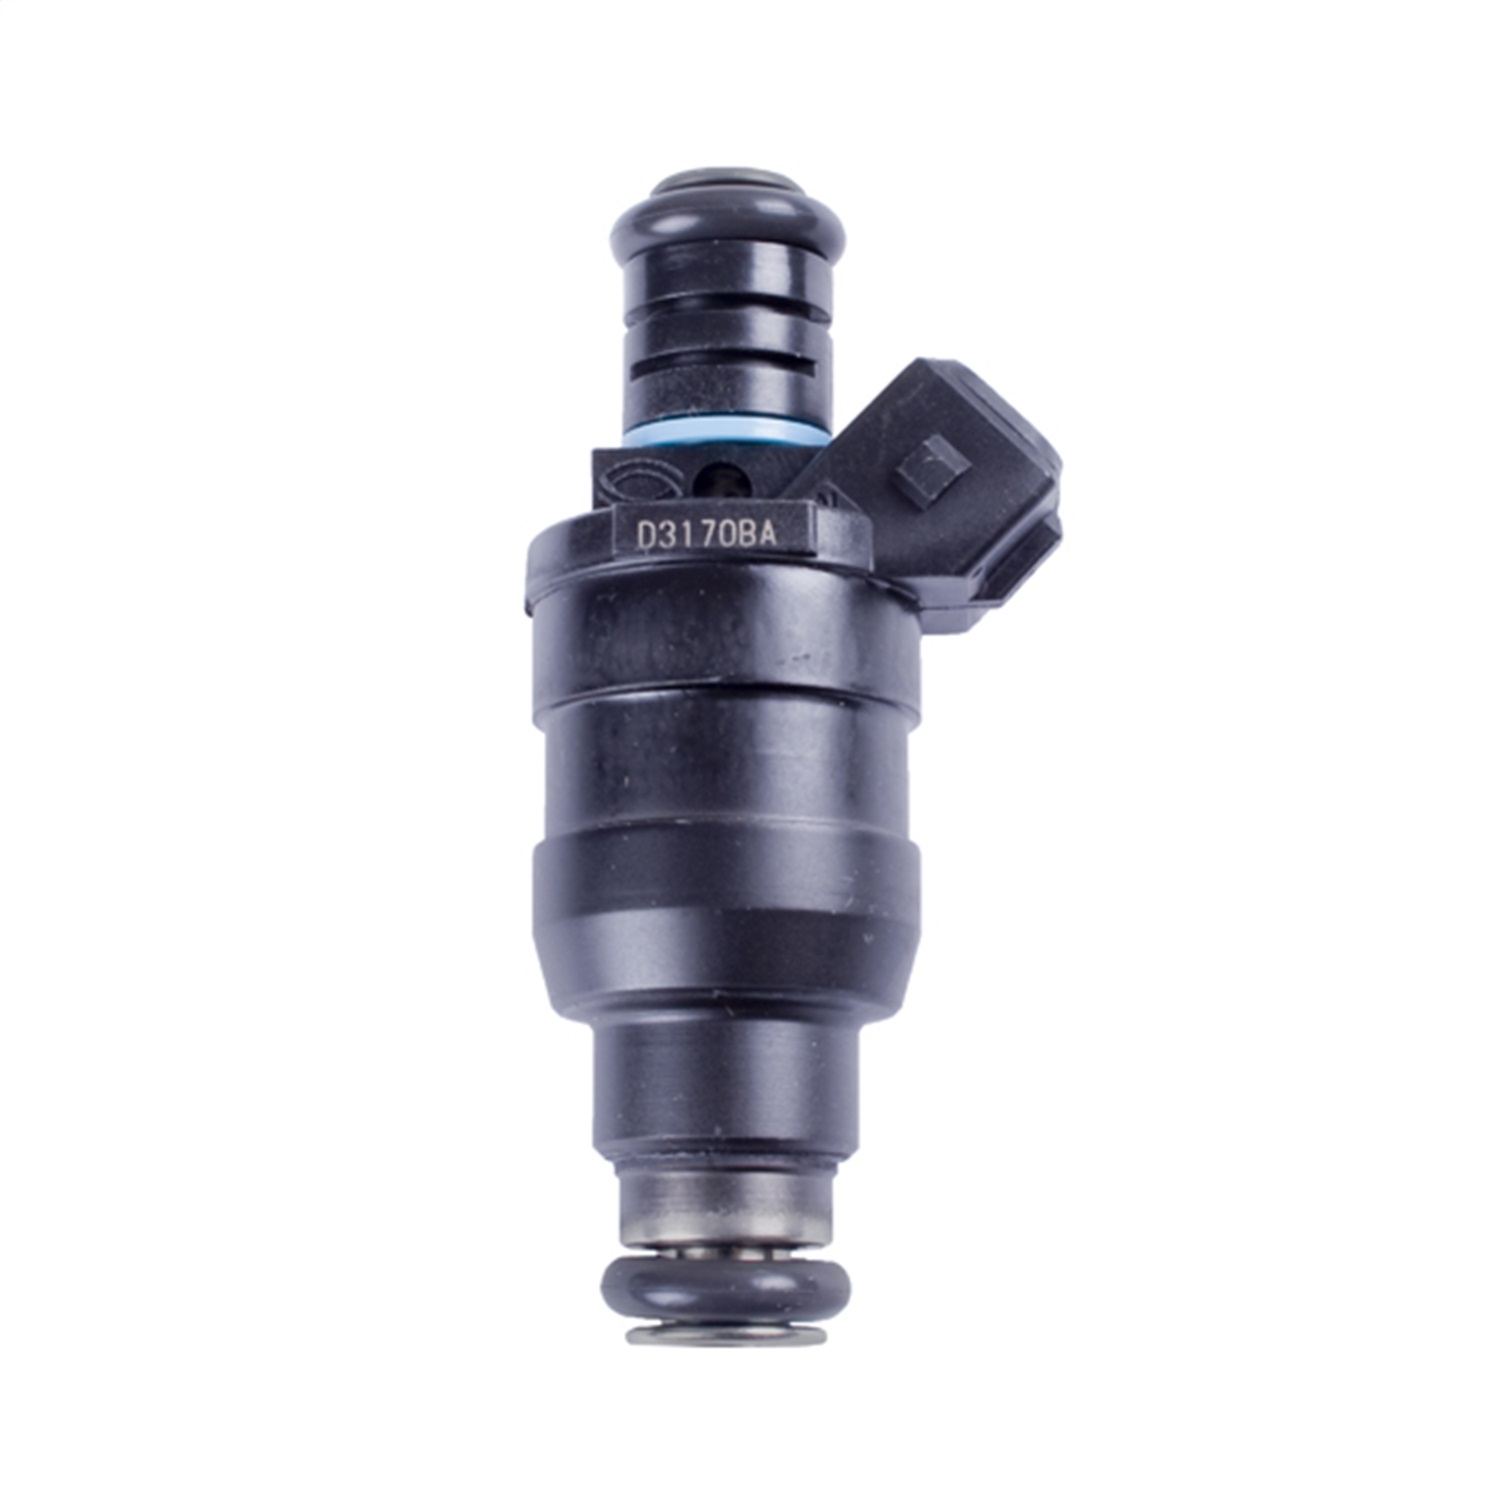 Omix Fuel Injector, 1991-1993 Jeep Wrangler 4.0L Yj By Omix, BKGF-17714.04